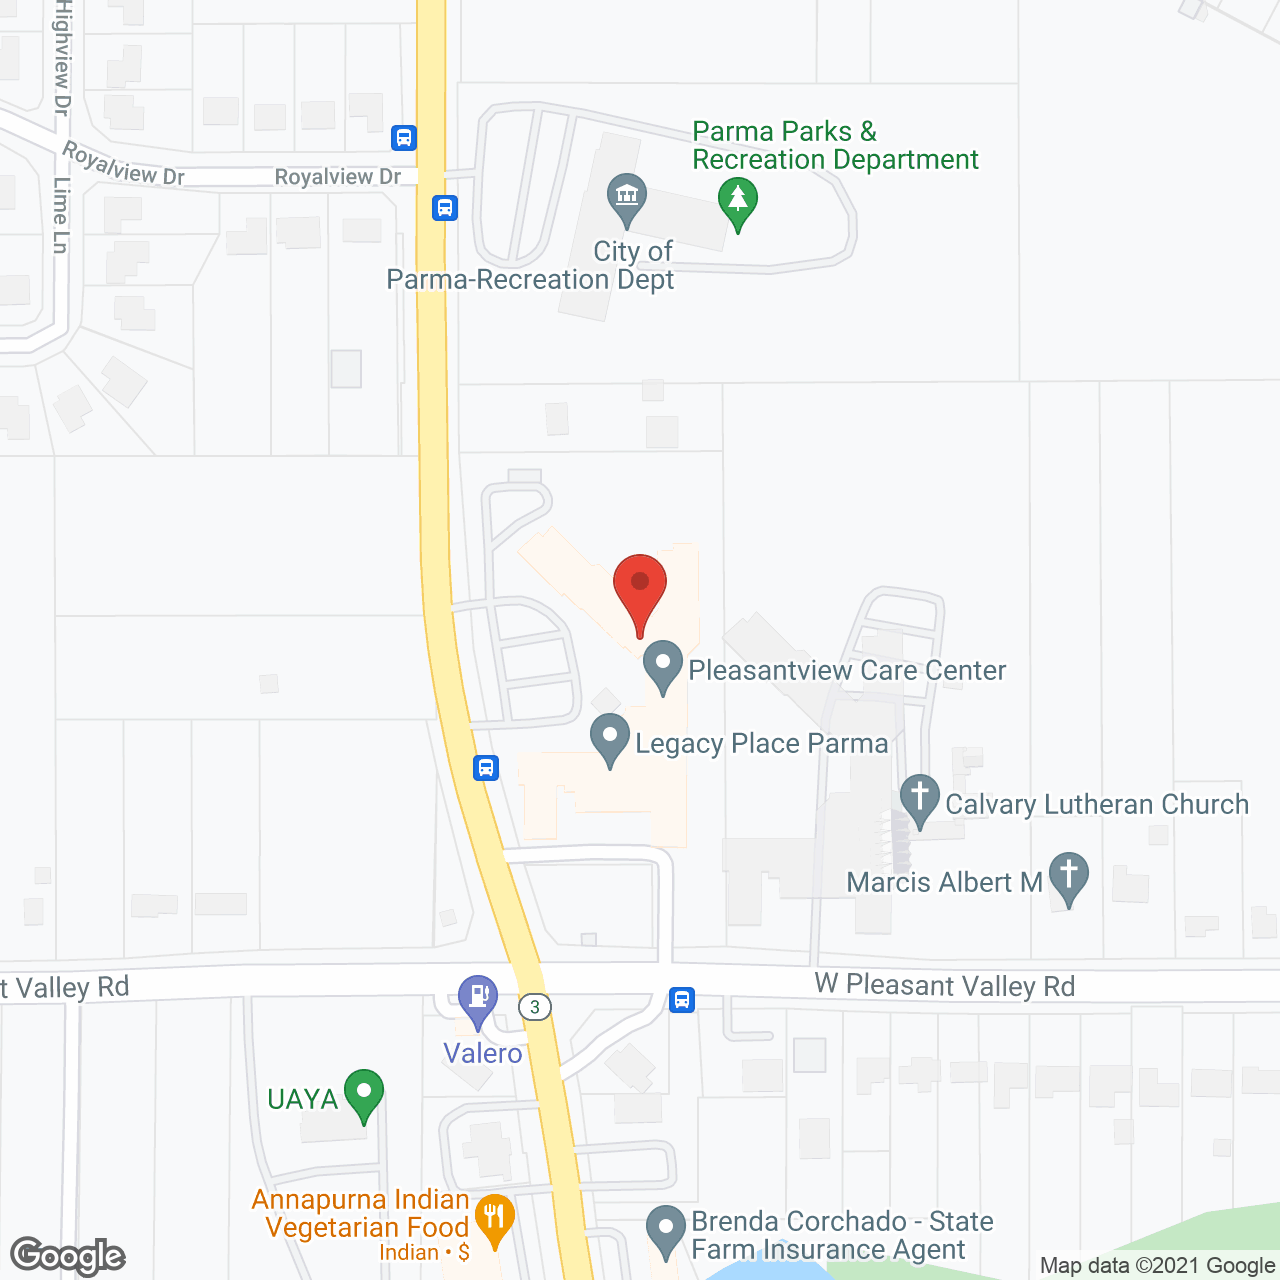 Pleasantview Care Center and Legacy Place in google map